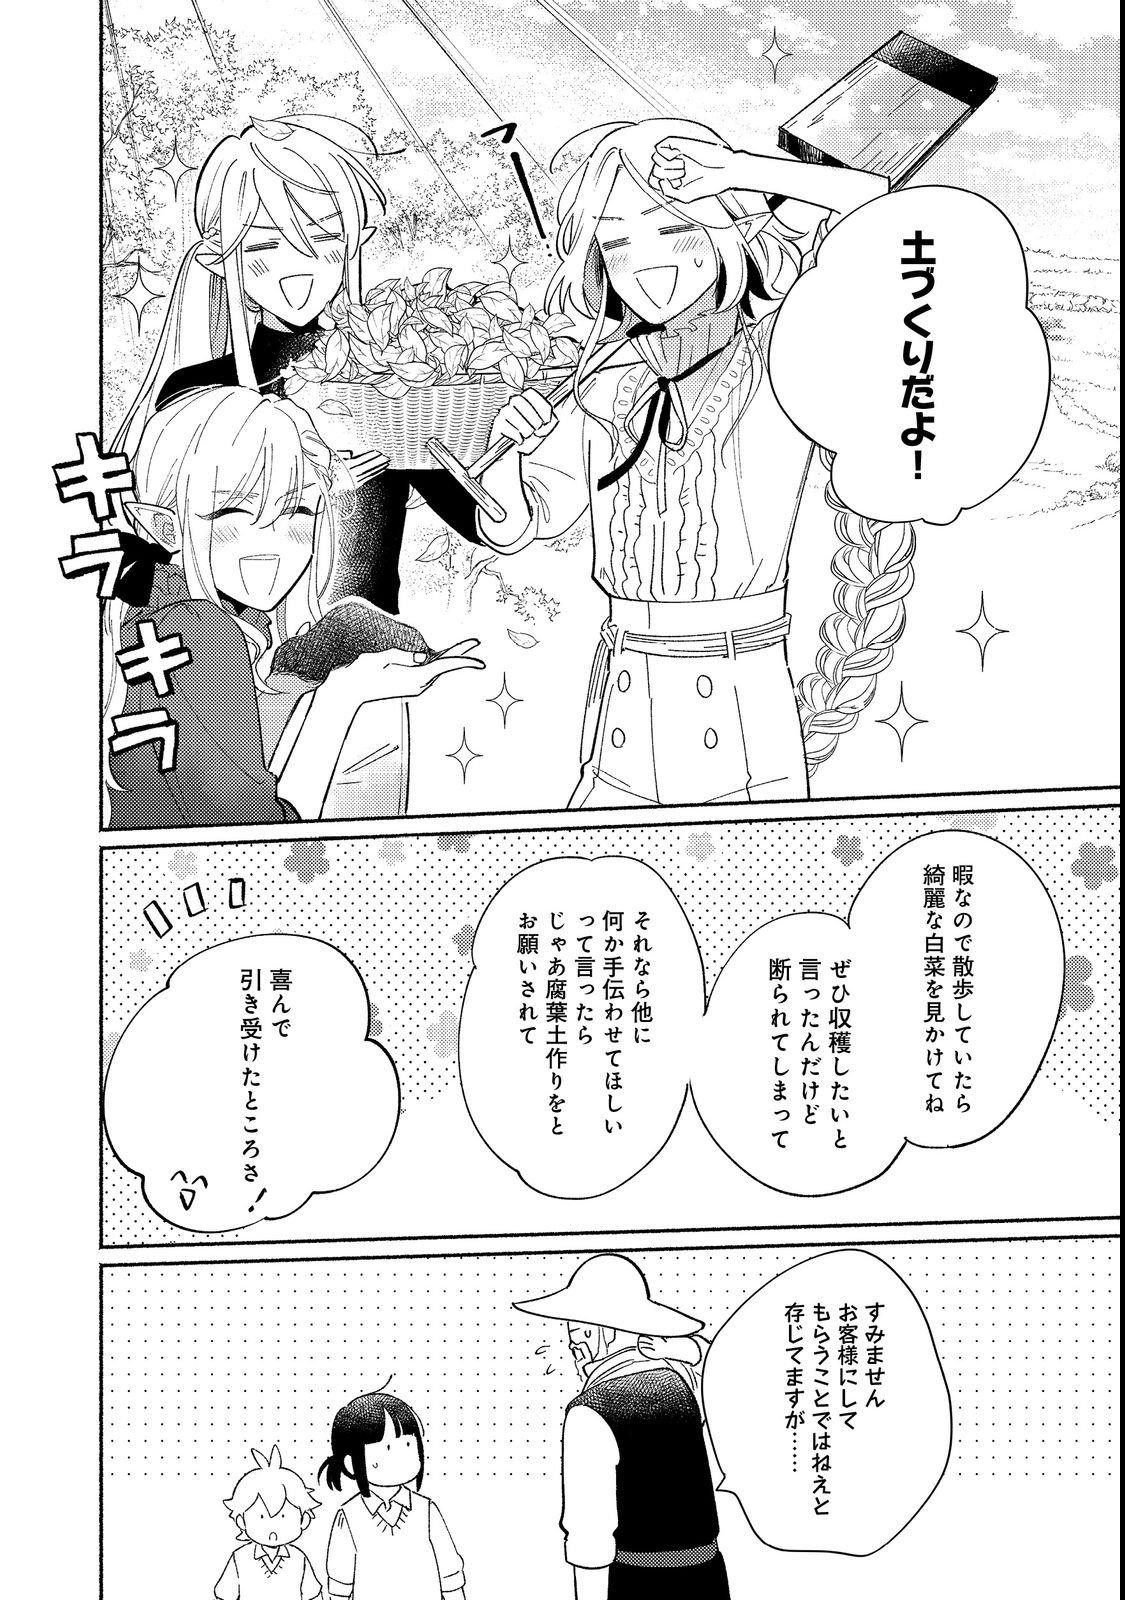 I’m the White Pig Nobleman 第17.2話 - Page 11